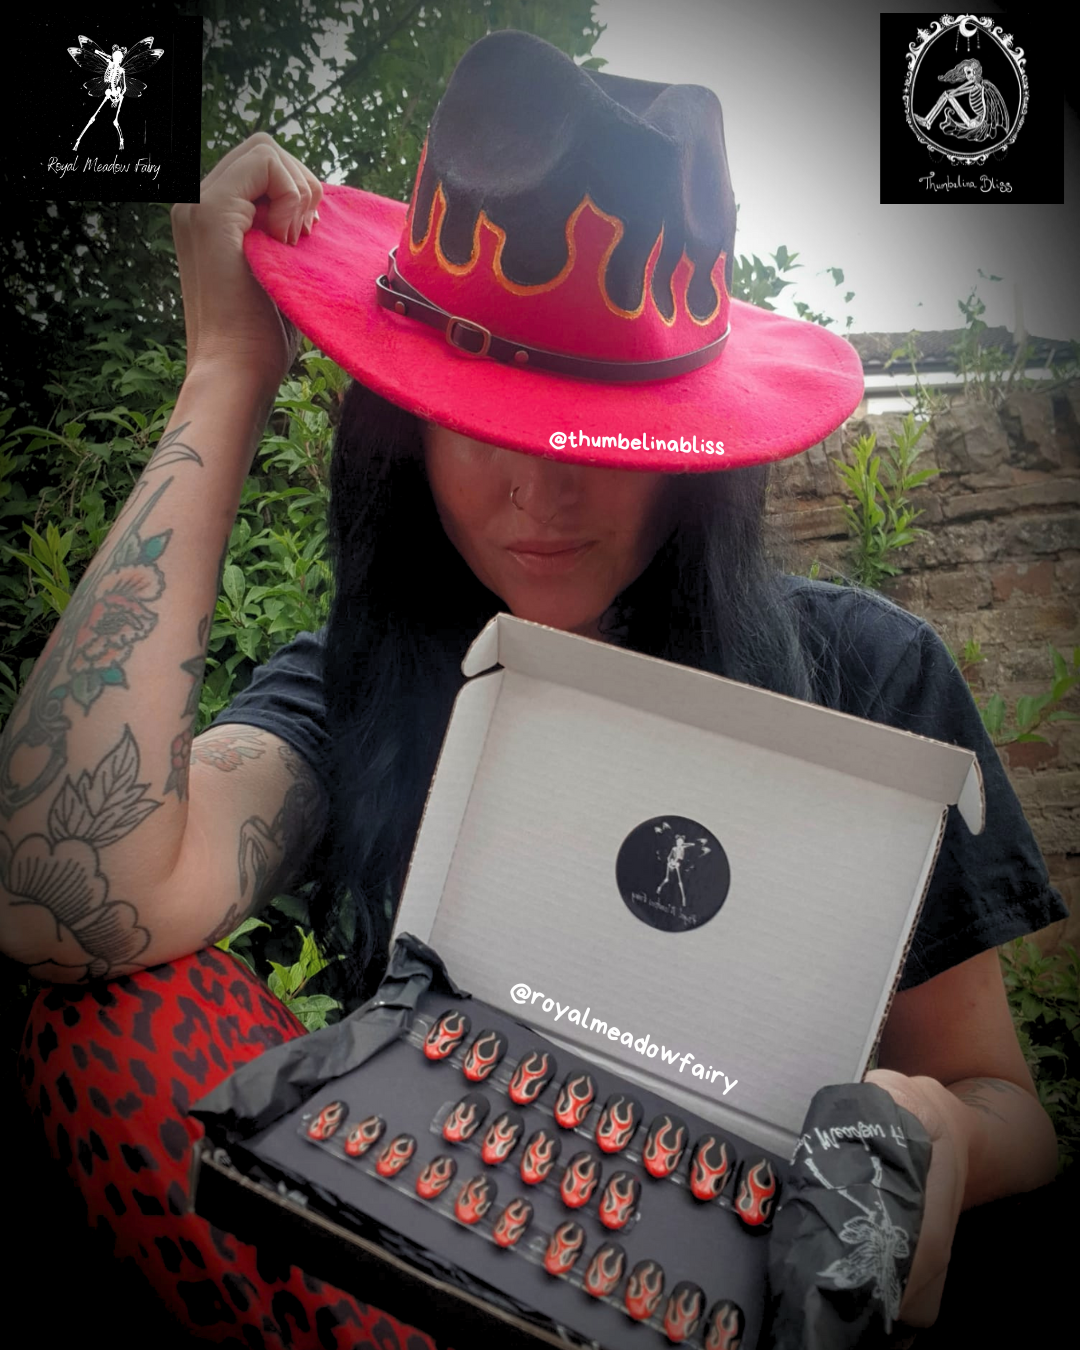 matching alt rocker chick accessories hand made press on nails and wide brimmed hat black with red flames 